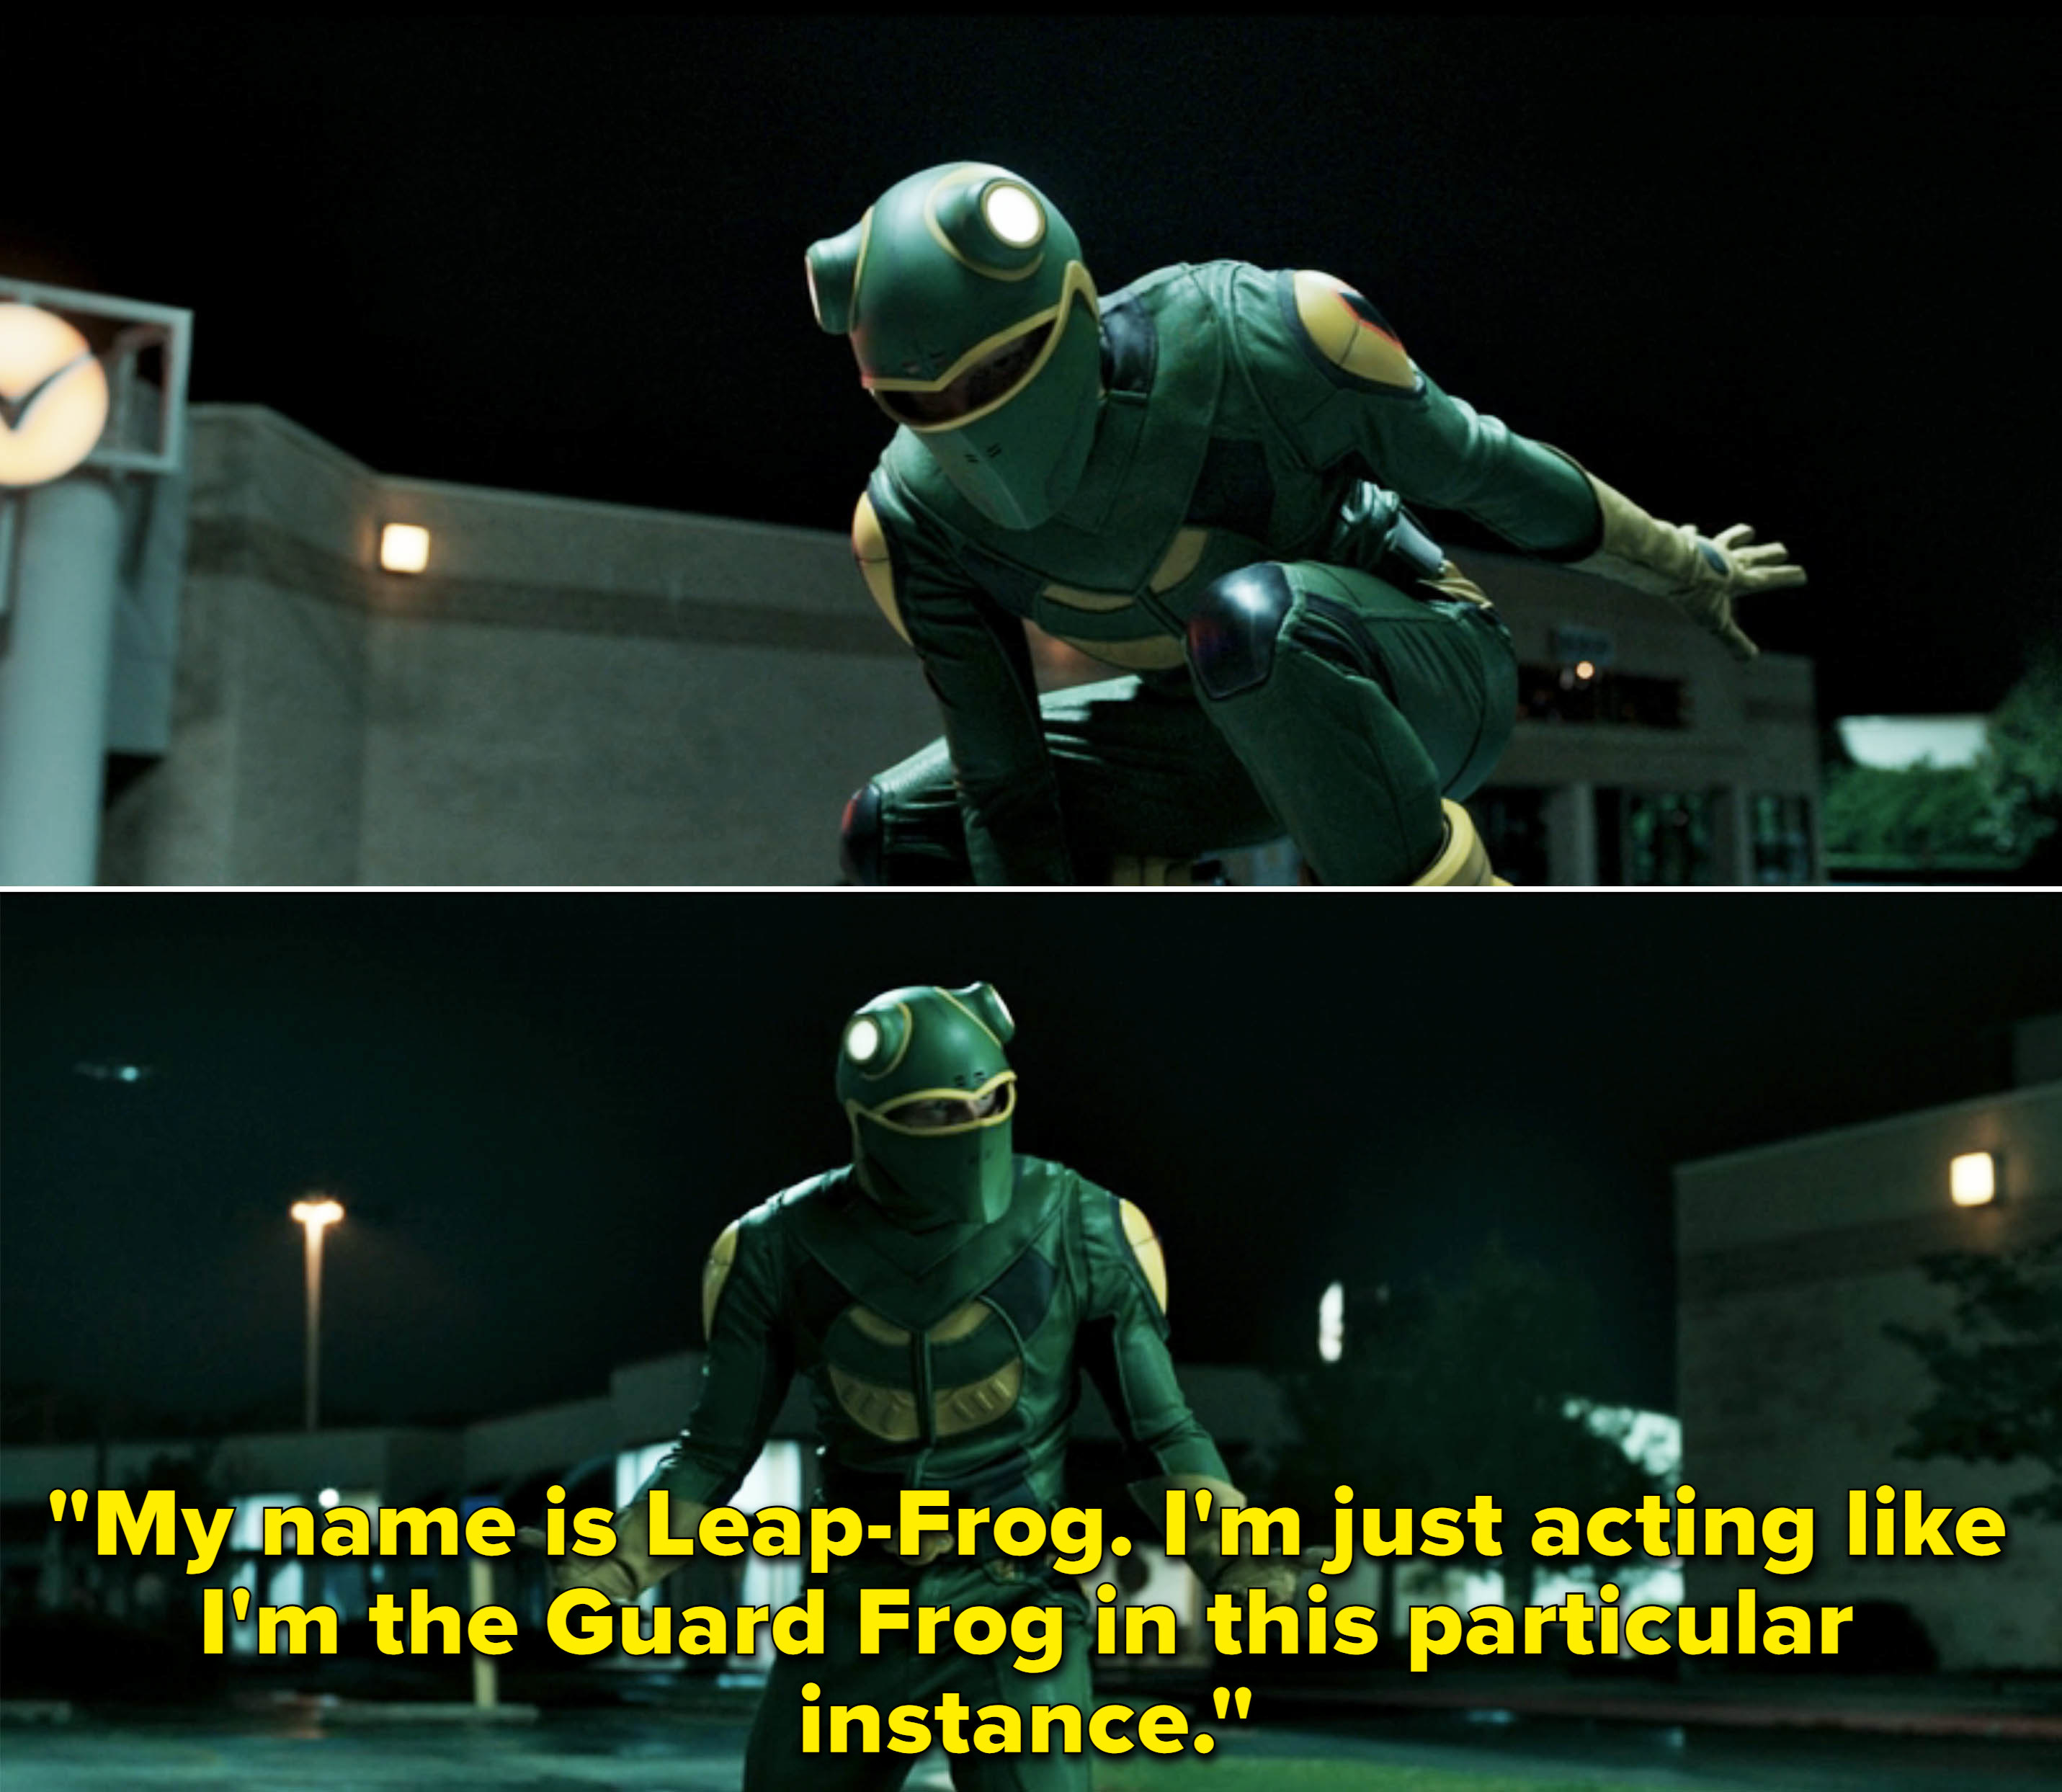 leap saying he's the guard frog in this particular instance